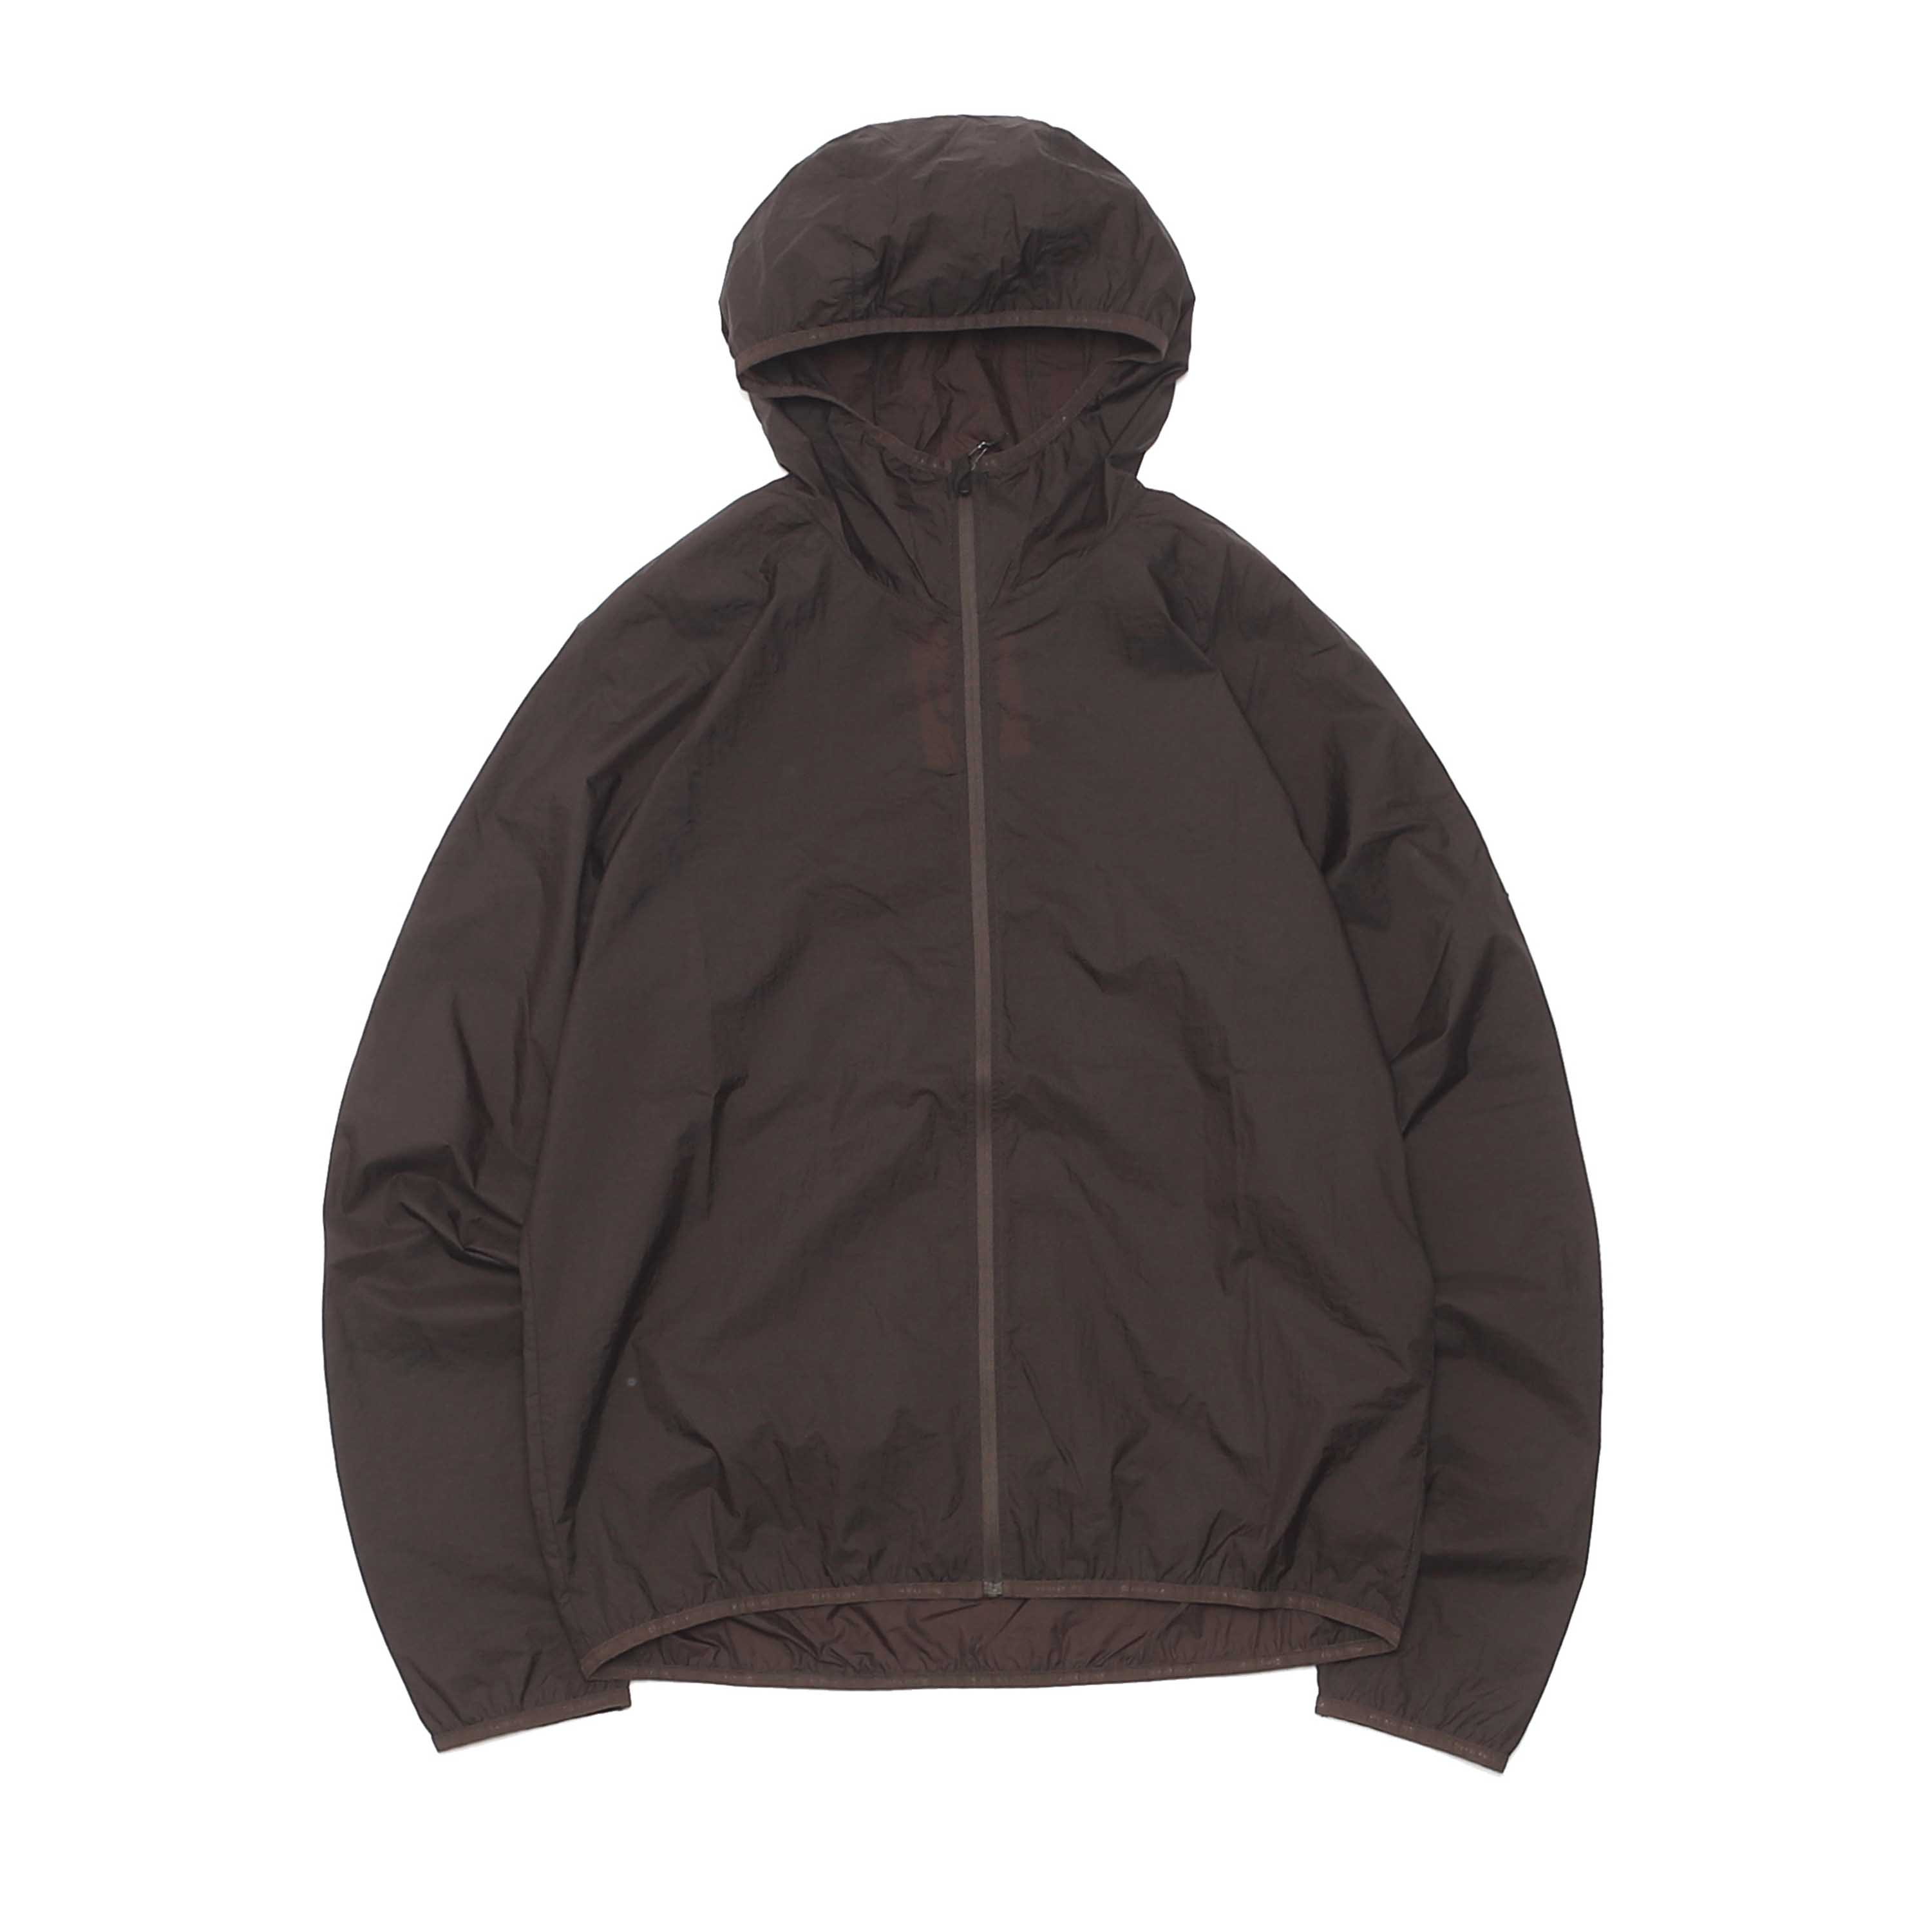 ULTRALIGHT PACKABLE DWR WIND JACKET - CACAO